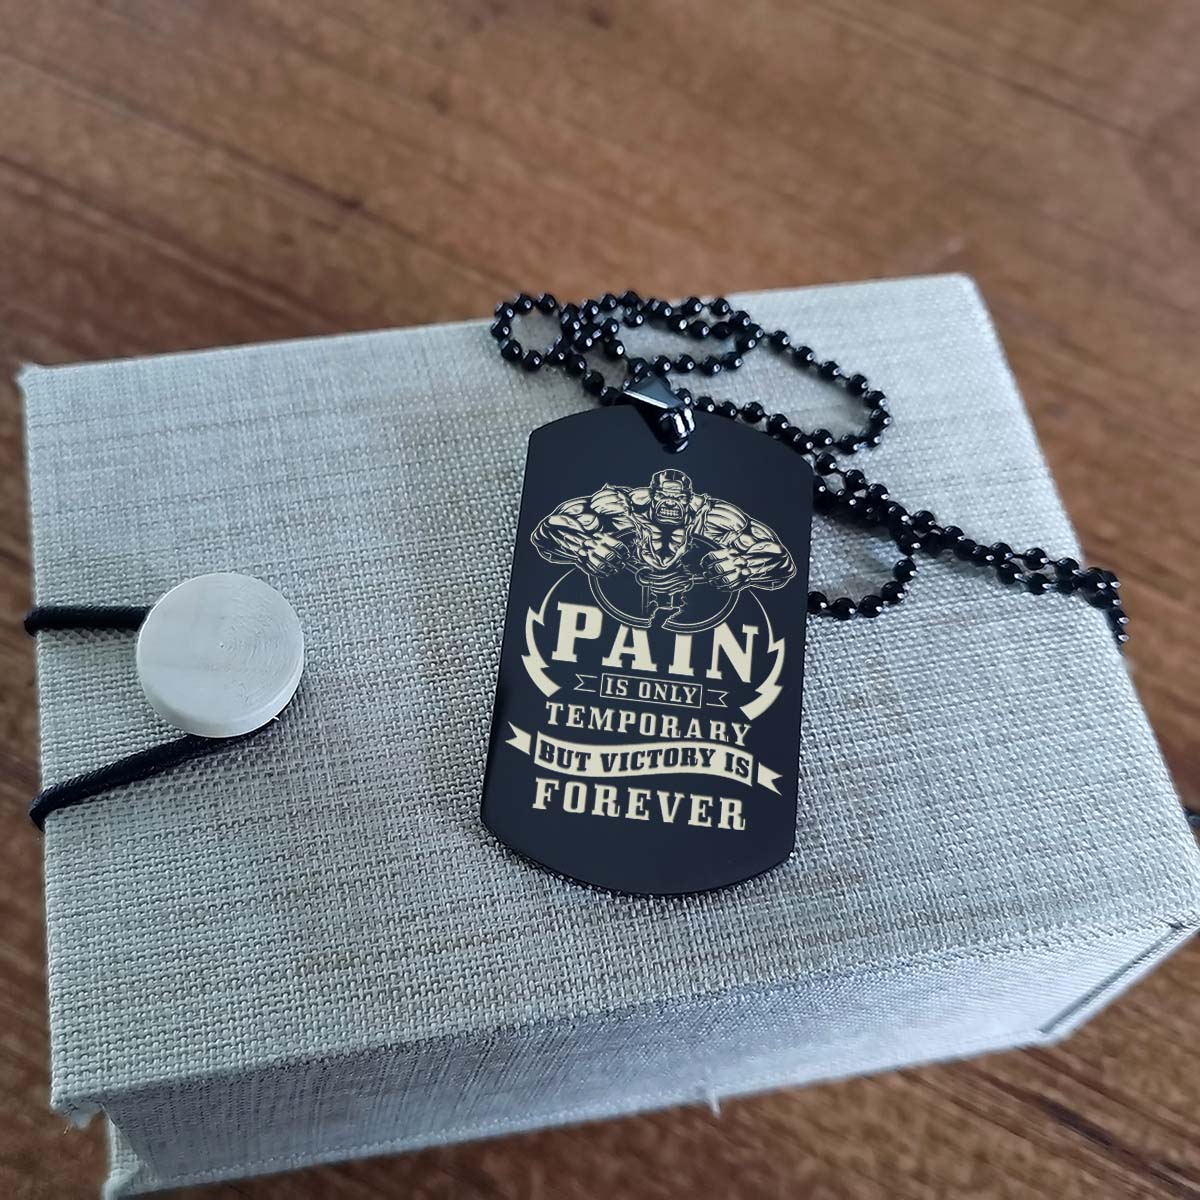 PAIN Is Only Temporary - It's About Being Better Than You Were The Day Before - Gym - Fitness Center - Workout - Gym Dog Tag - Gym Necklace - Engrave Dog Tag